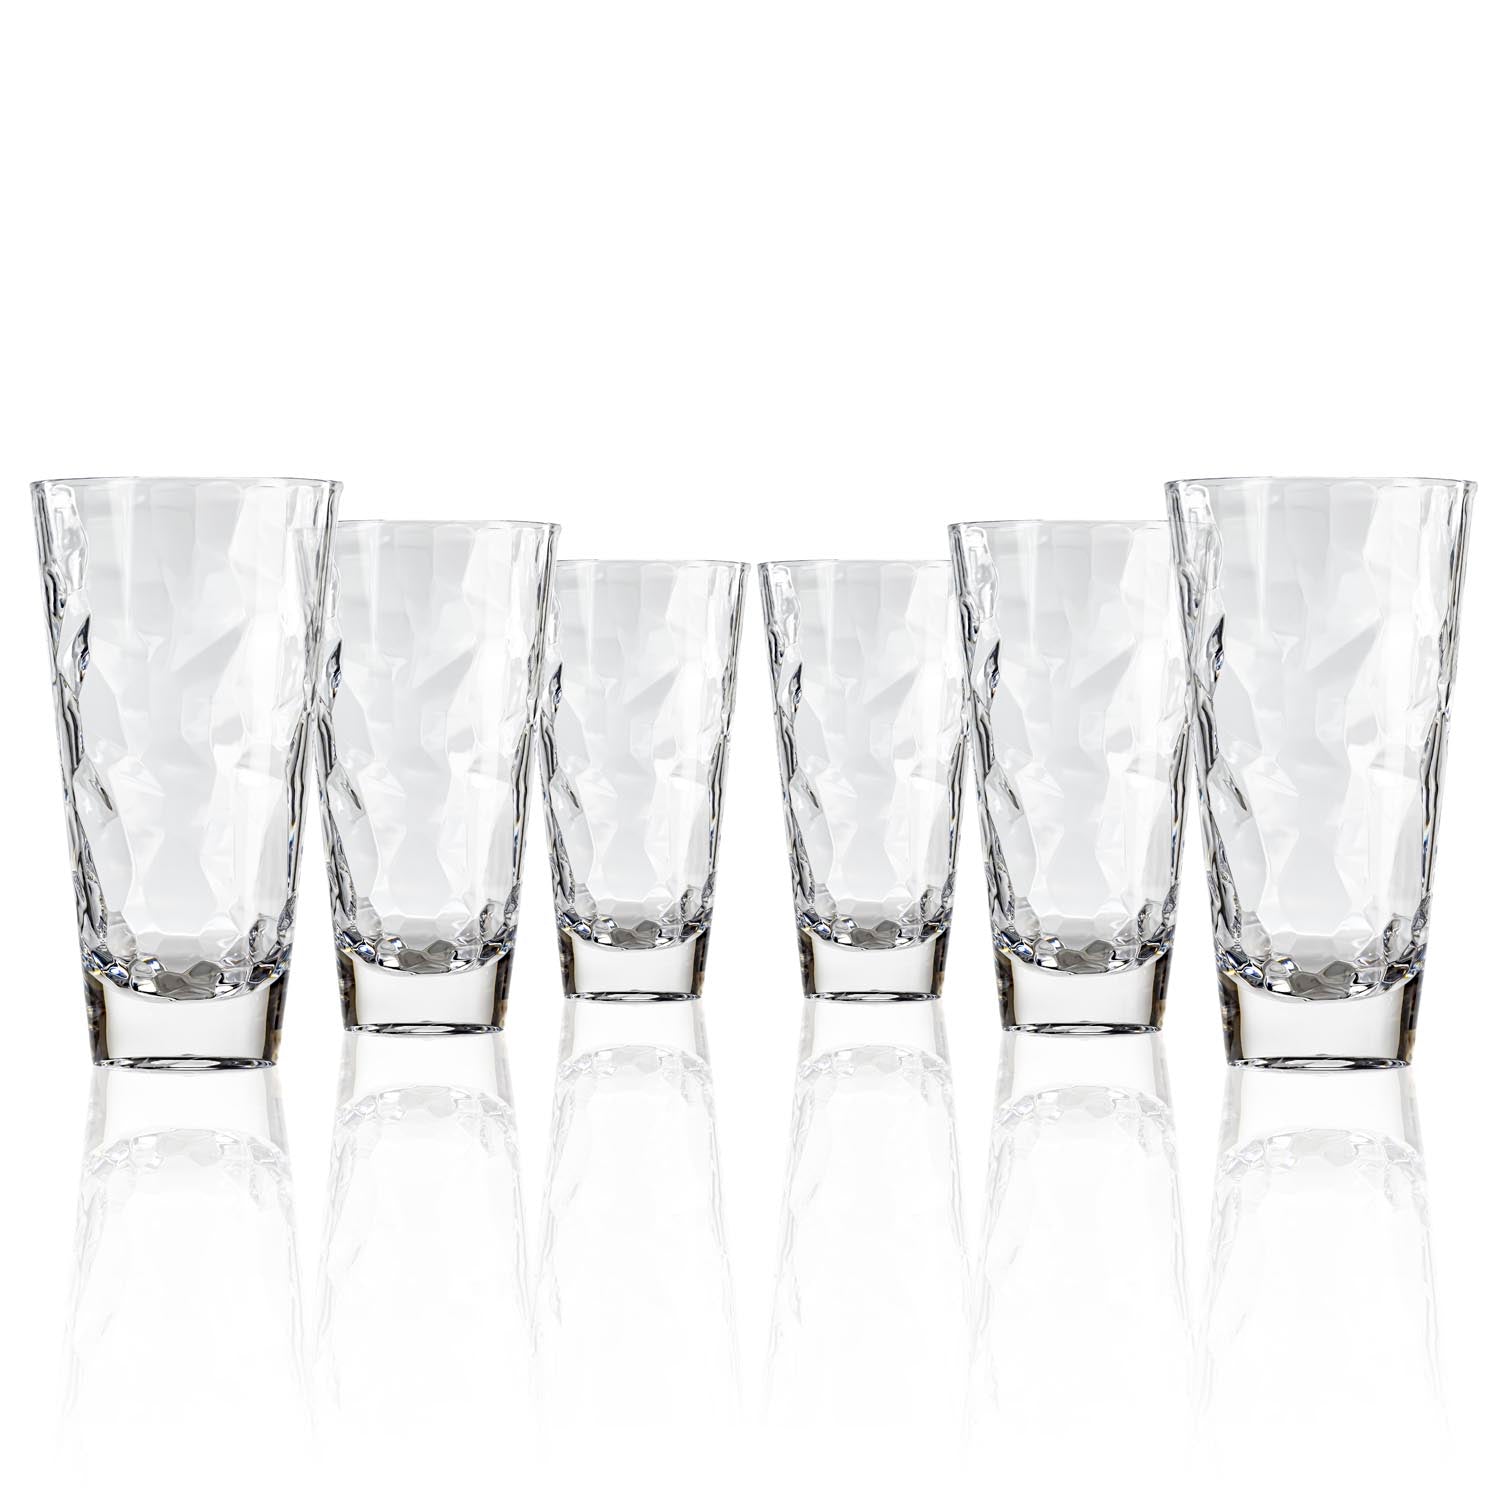 Set of 6, 17-ounce clear acrylic tumbler glasses from the Merritt Designs Cascade collection. Front view on white background